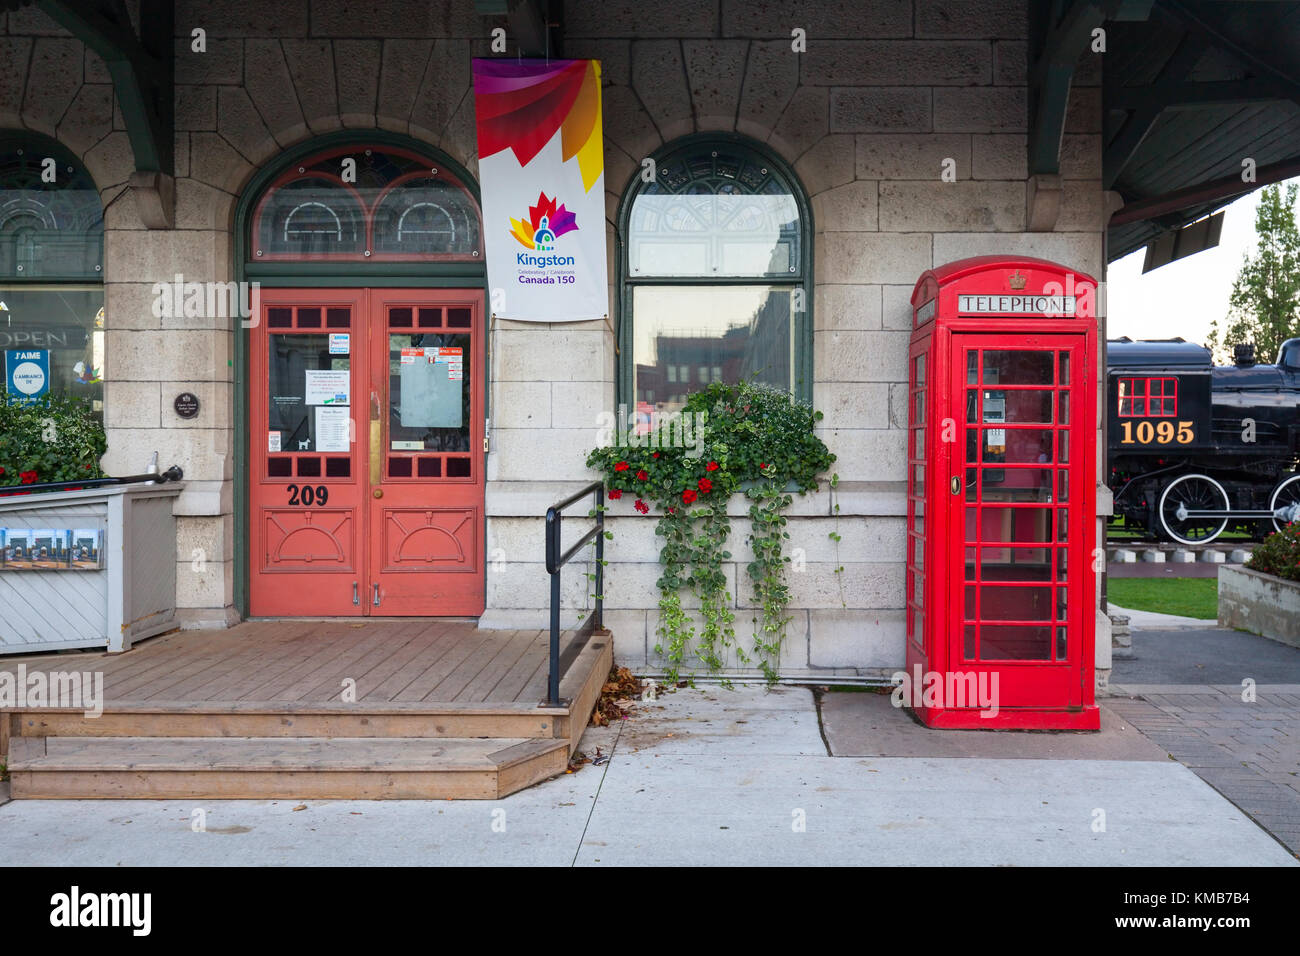 A K6 British telephone booth in front of the K & P Railway Station that is now a Tourist Information Centre in Kingston, Ontario, Canada. Stock Photo